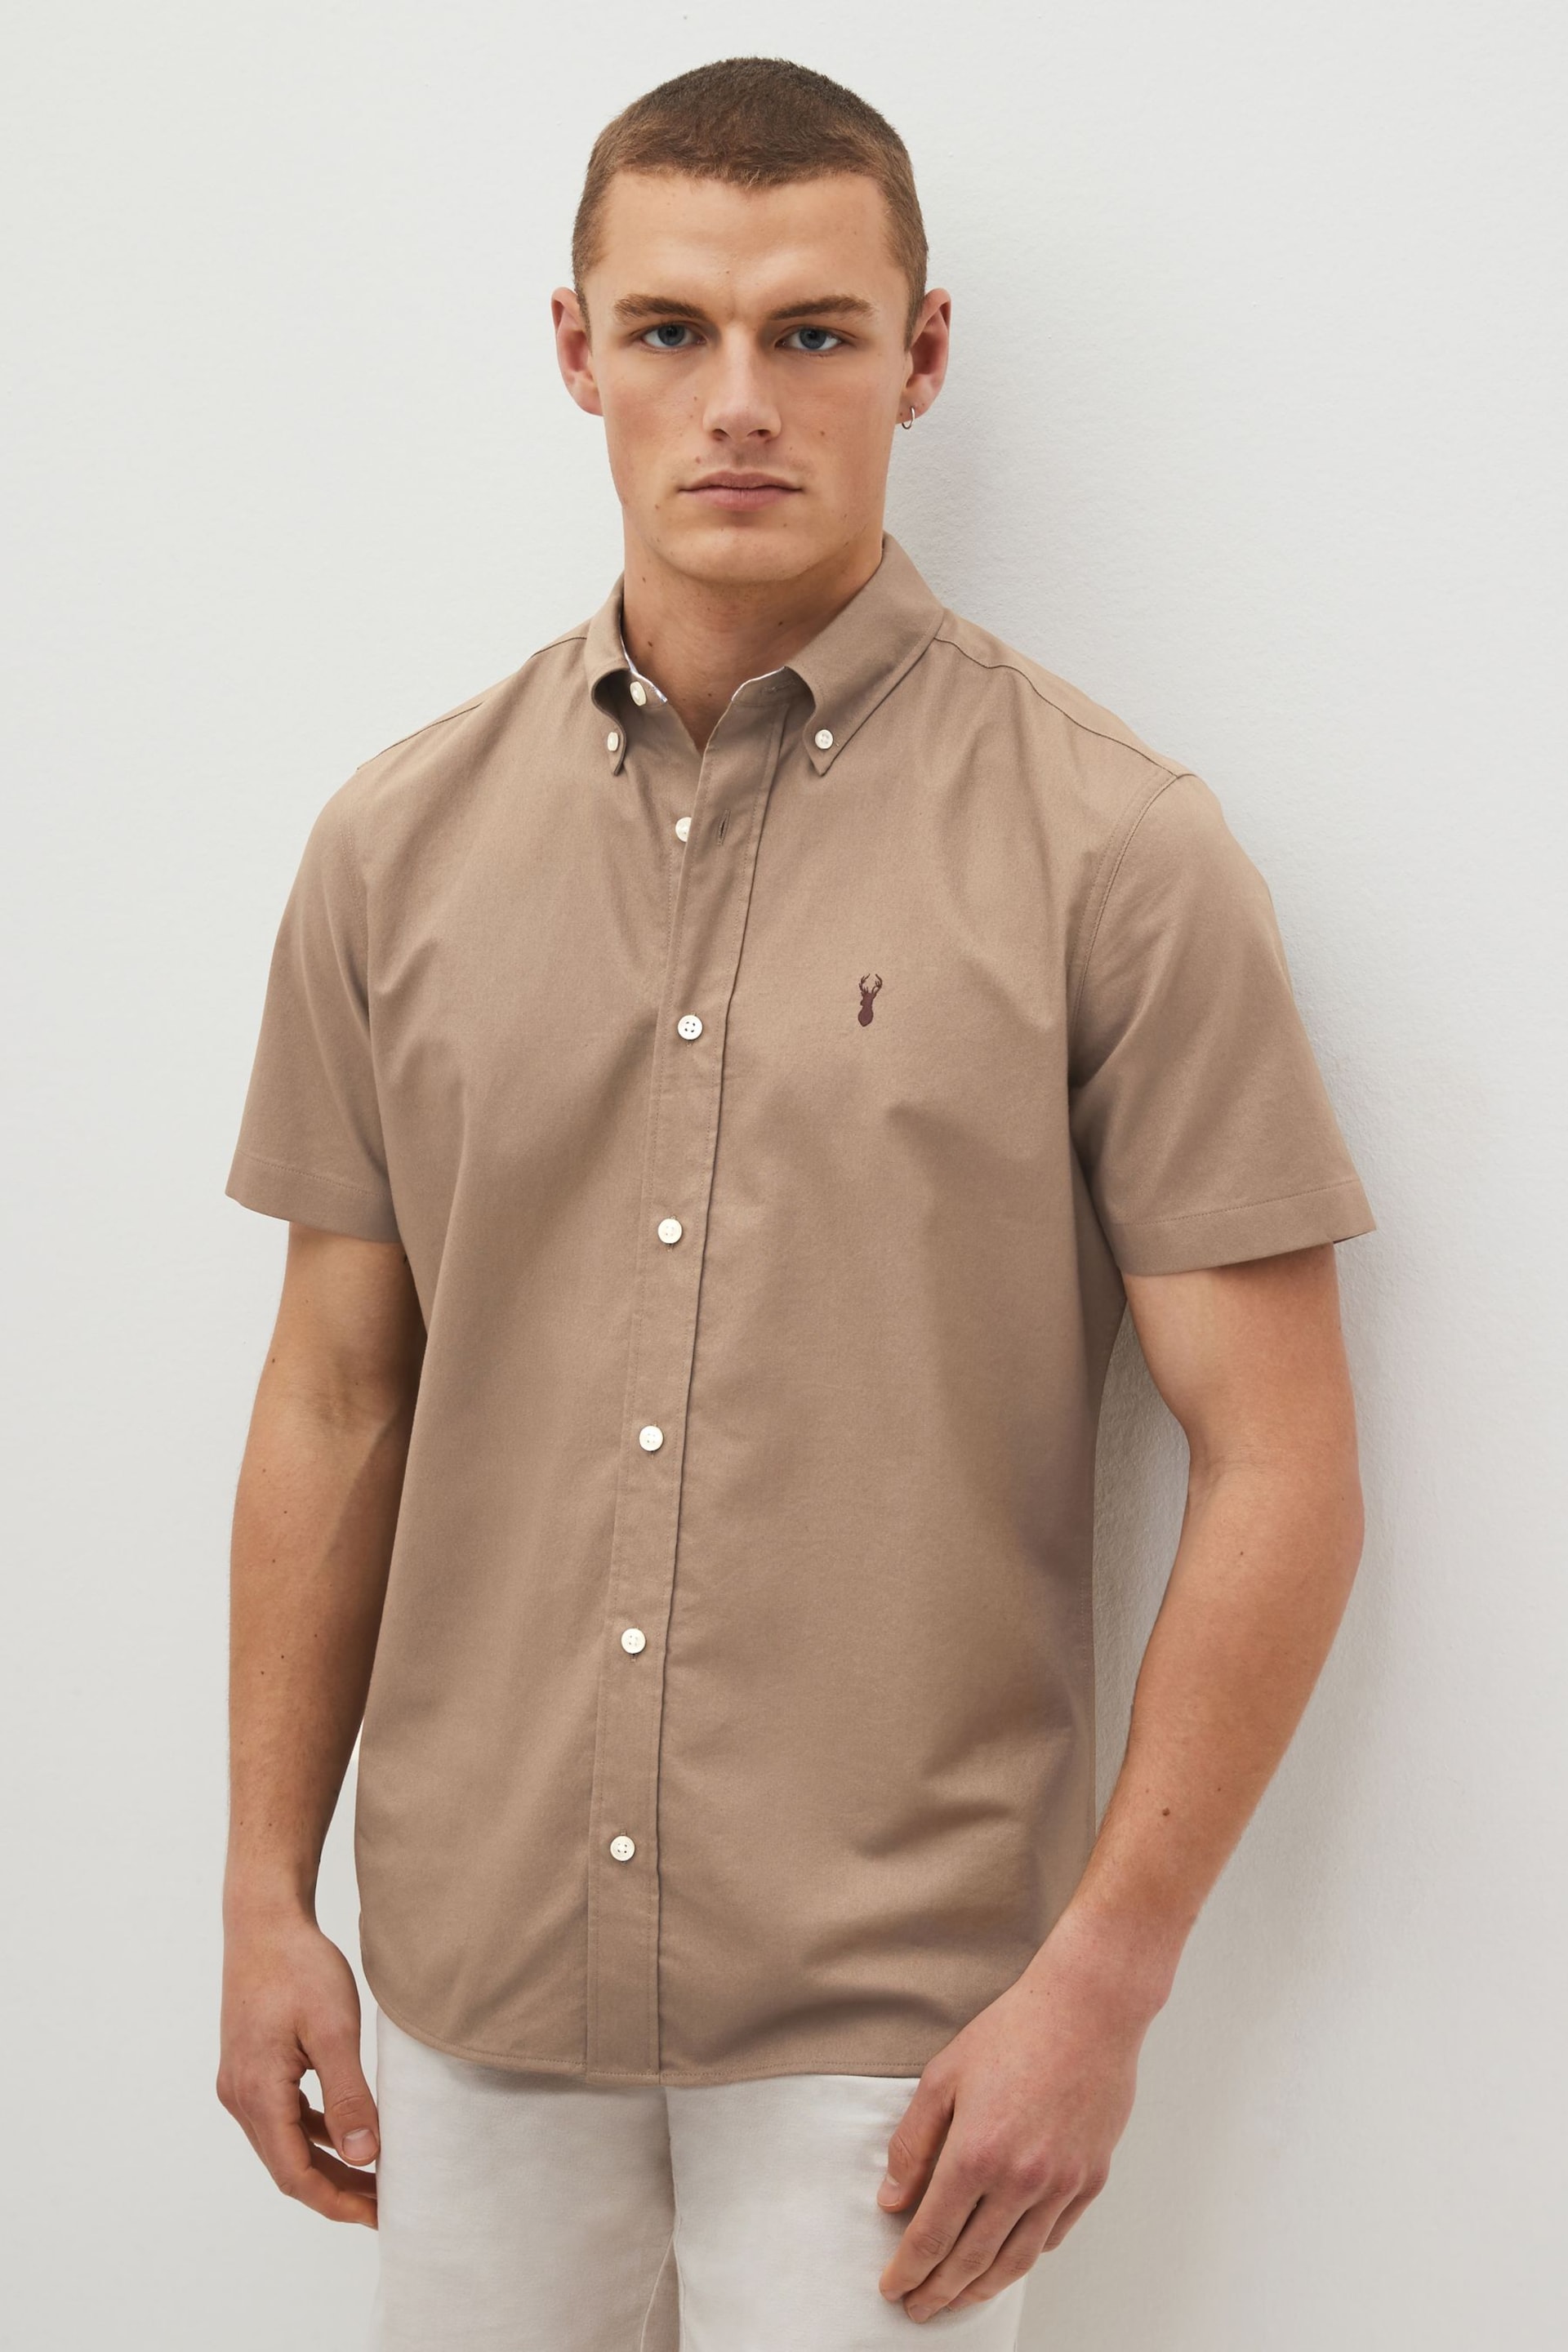 Stone Natural Slim Fit Short Sleeve Oxford Shirt - Image 1 of 6